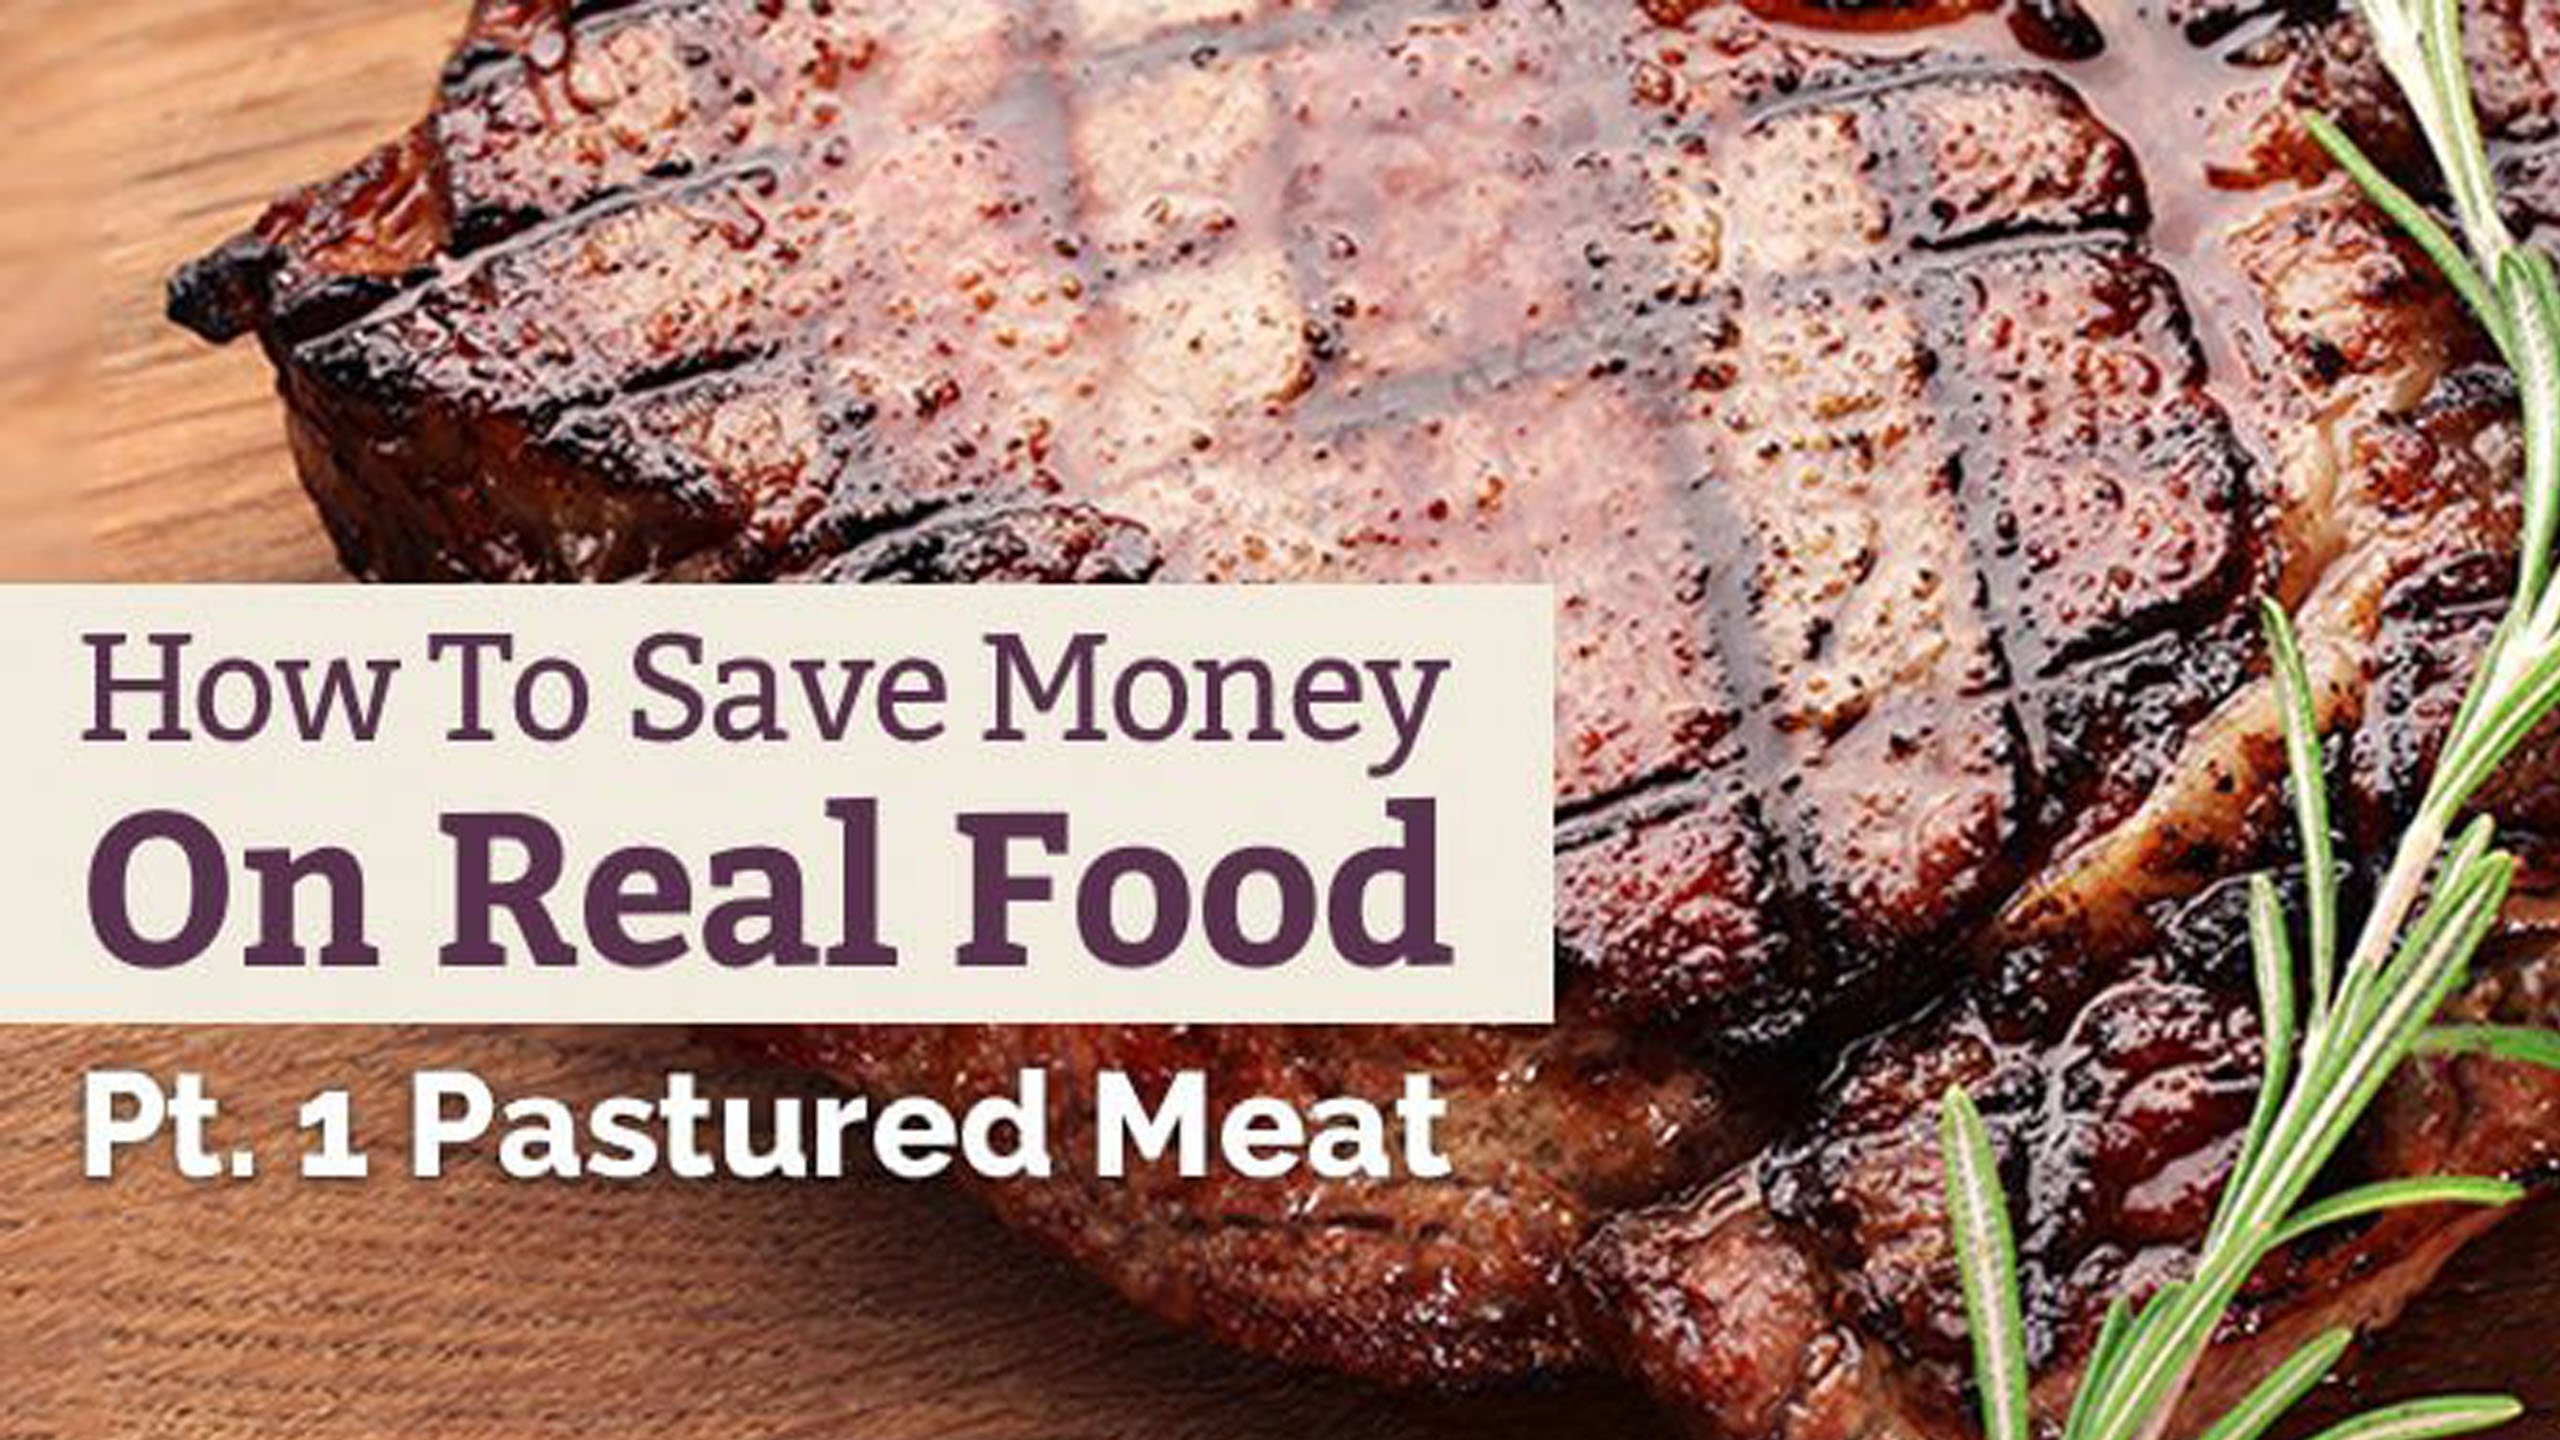 https://www.mamanatural.com/wp-content/uploads/how-to-save-money-on-real-food-pt-1-pastured-meat-post-by-mama-natural-1.jpg